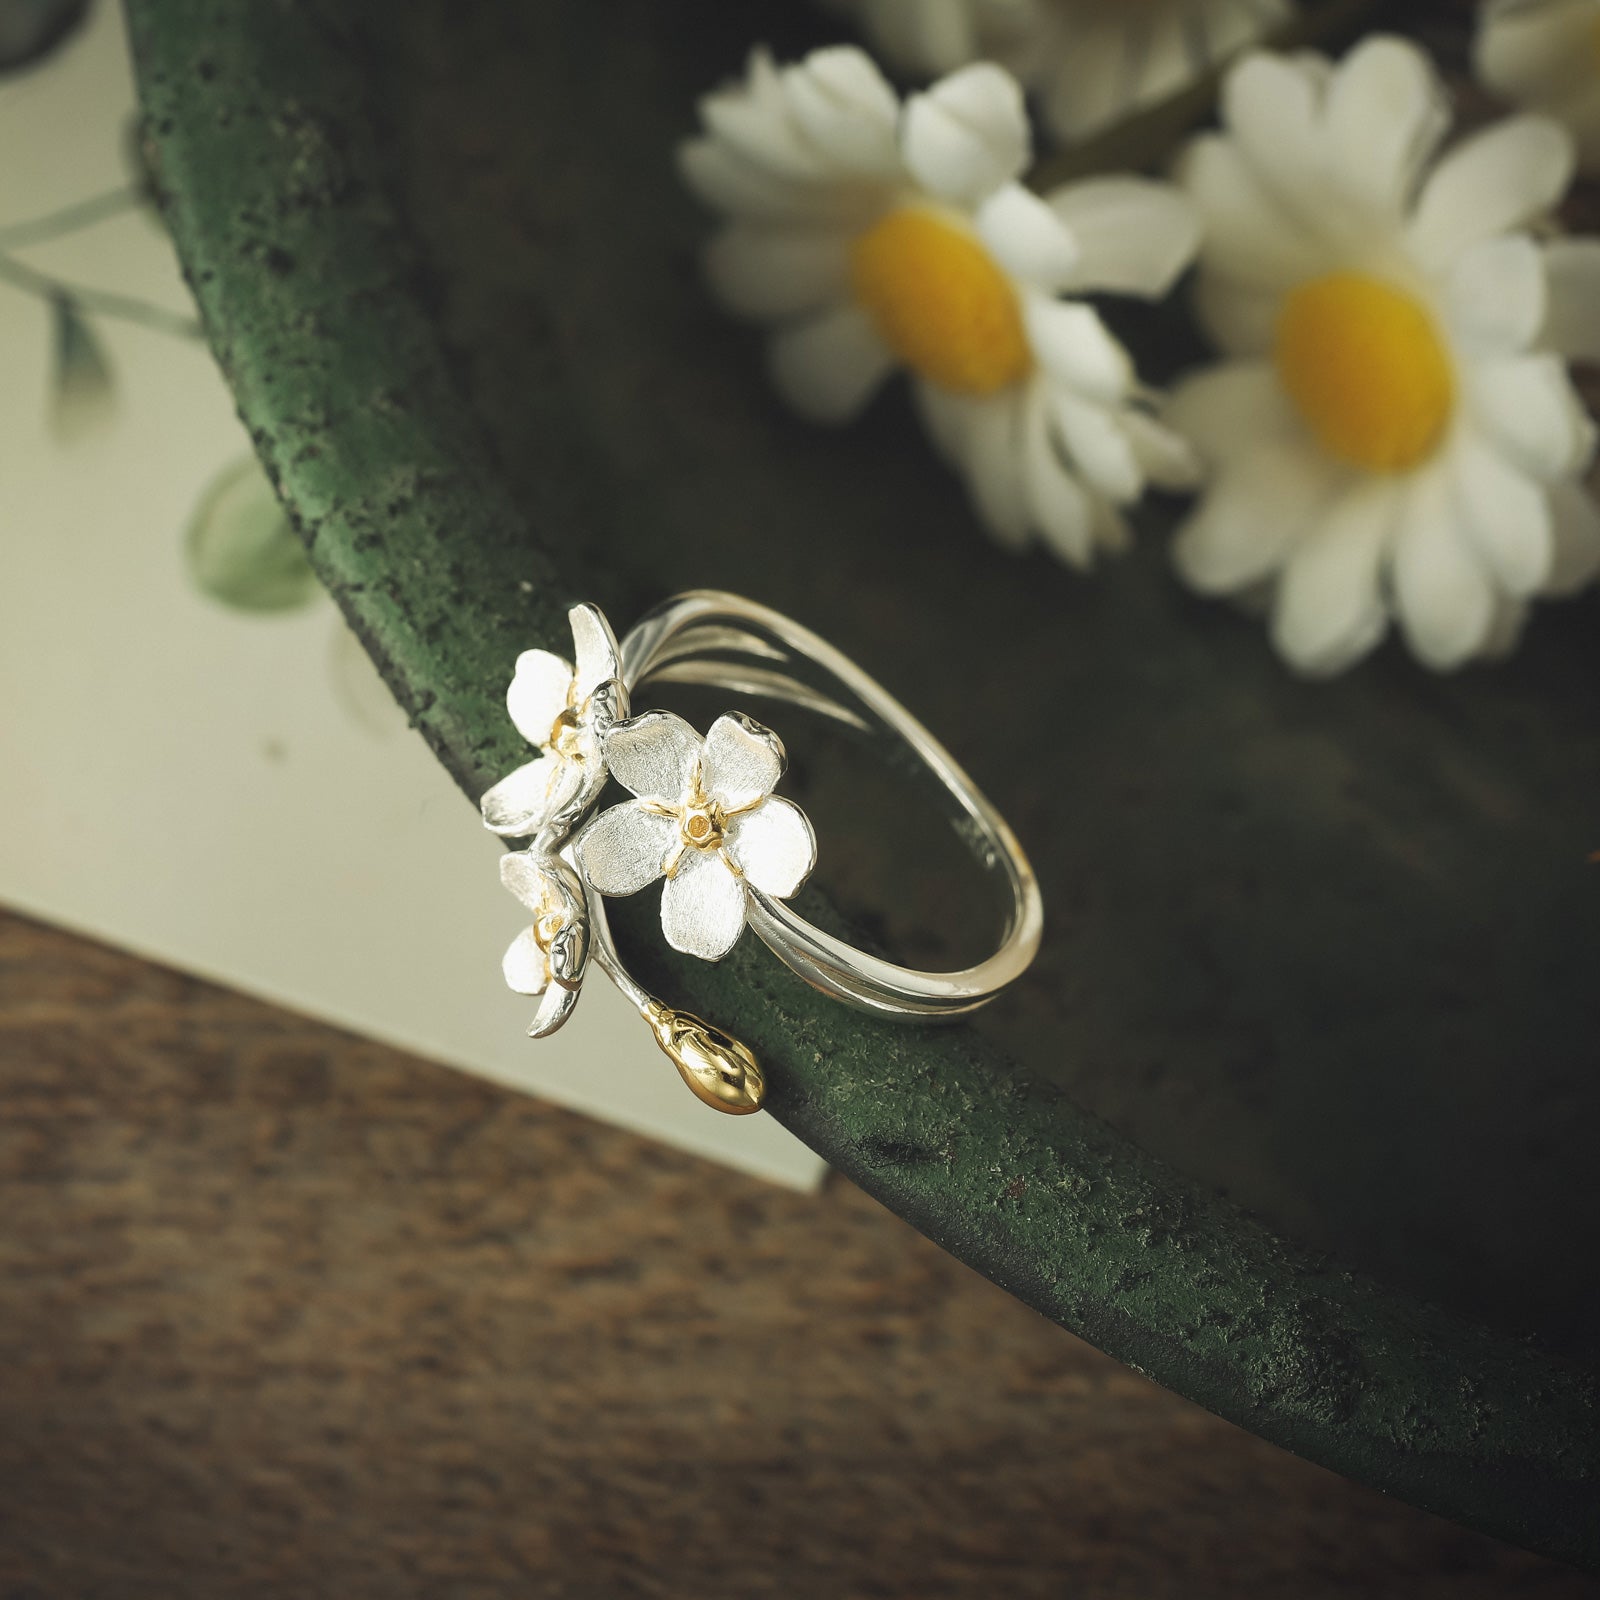 Forget-Me-Not Flowers 18k Gold Ring Jewelry Set